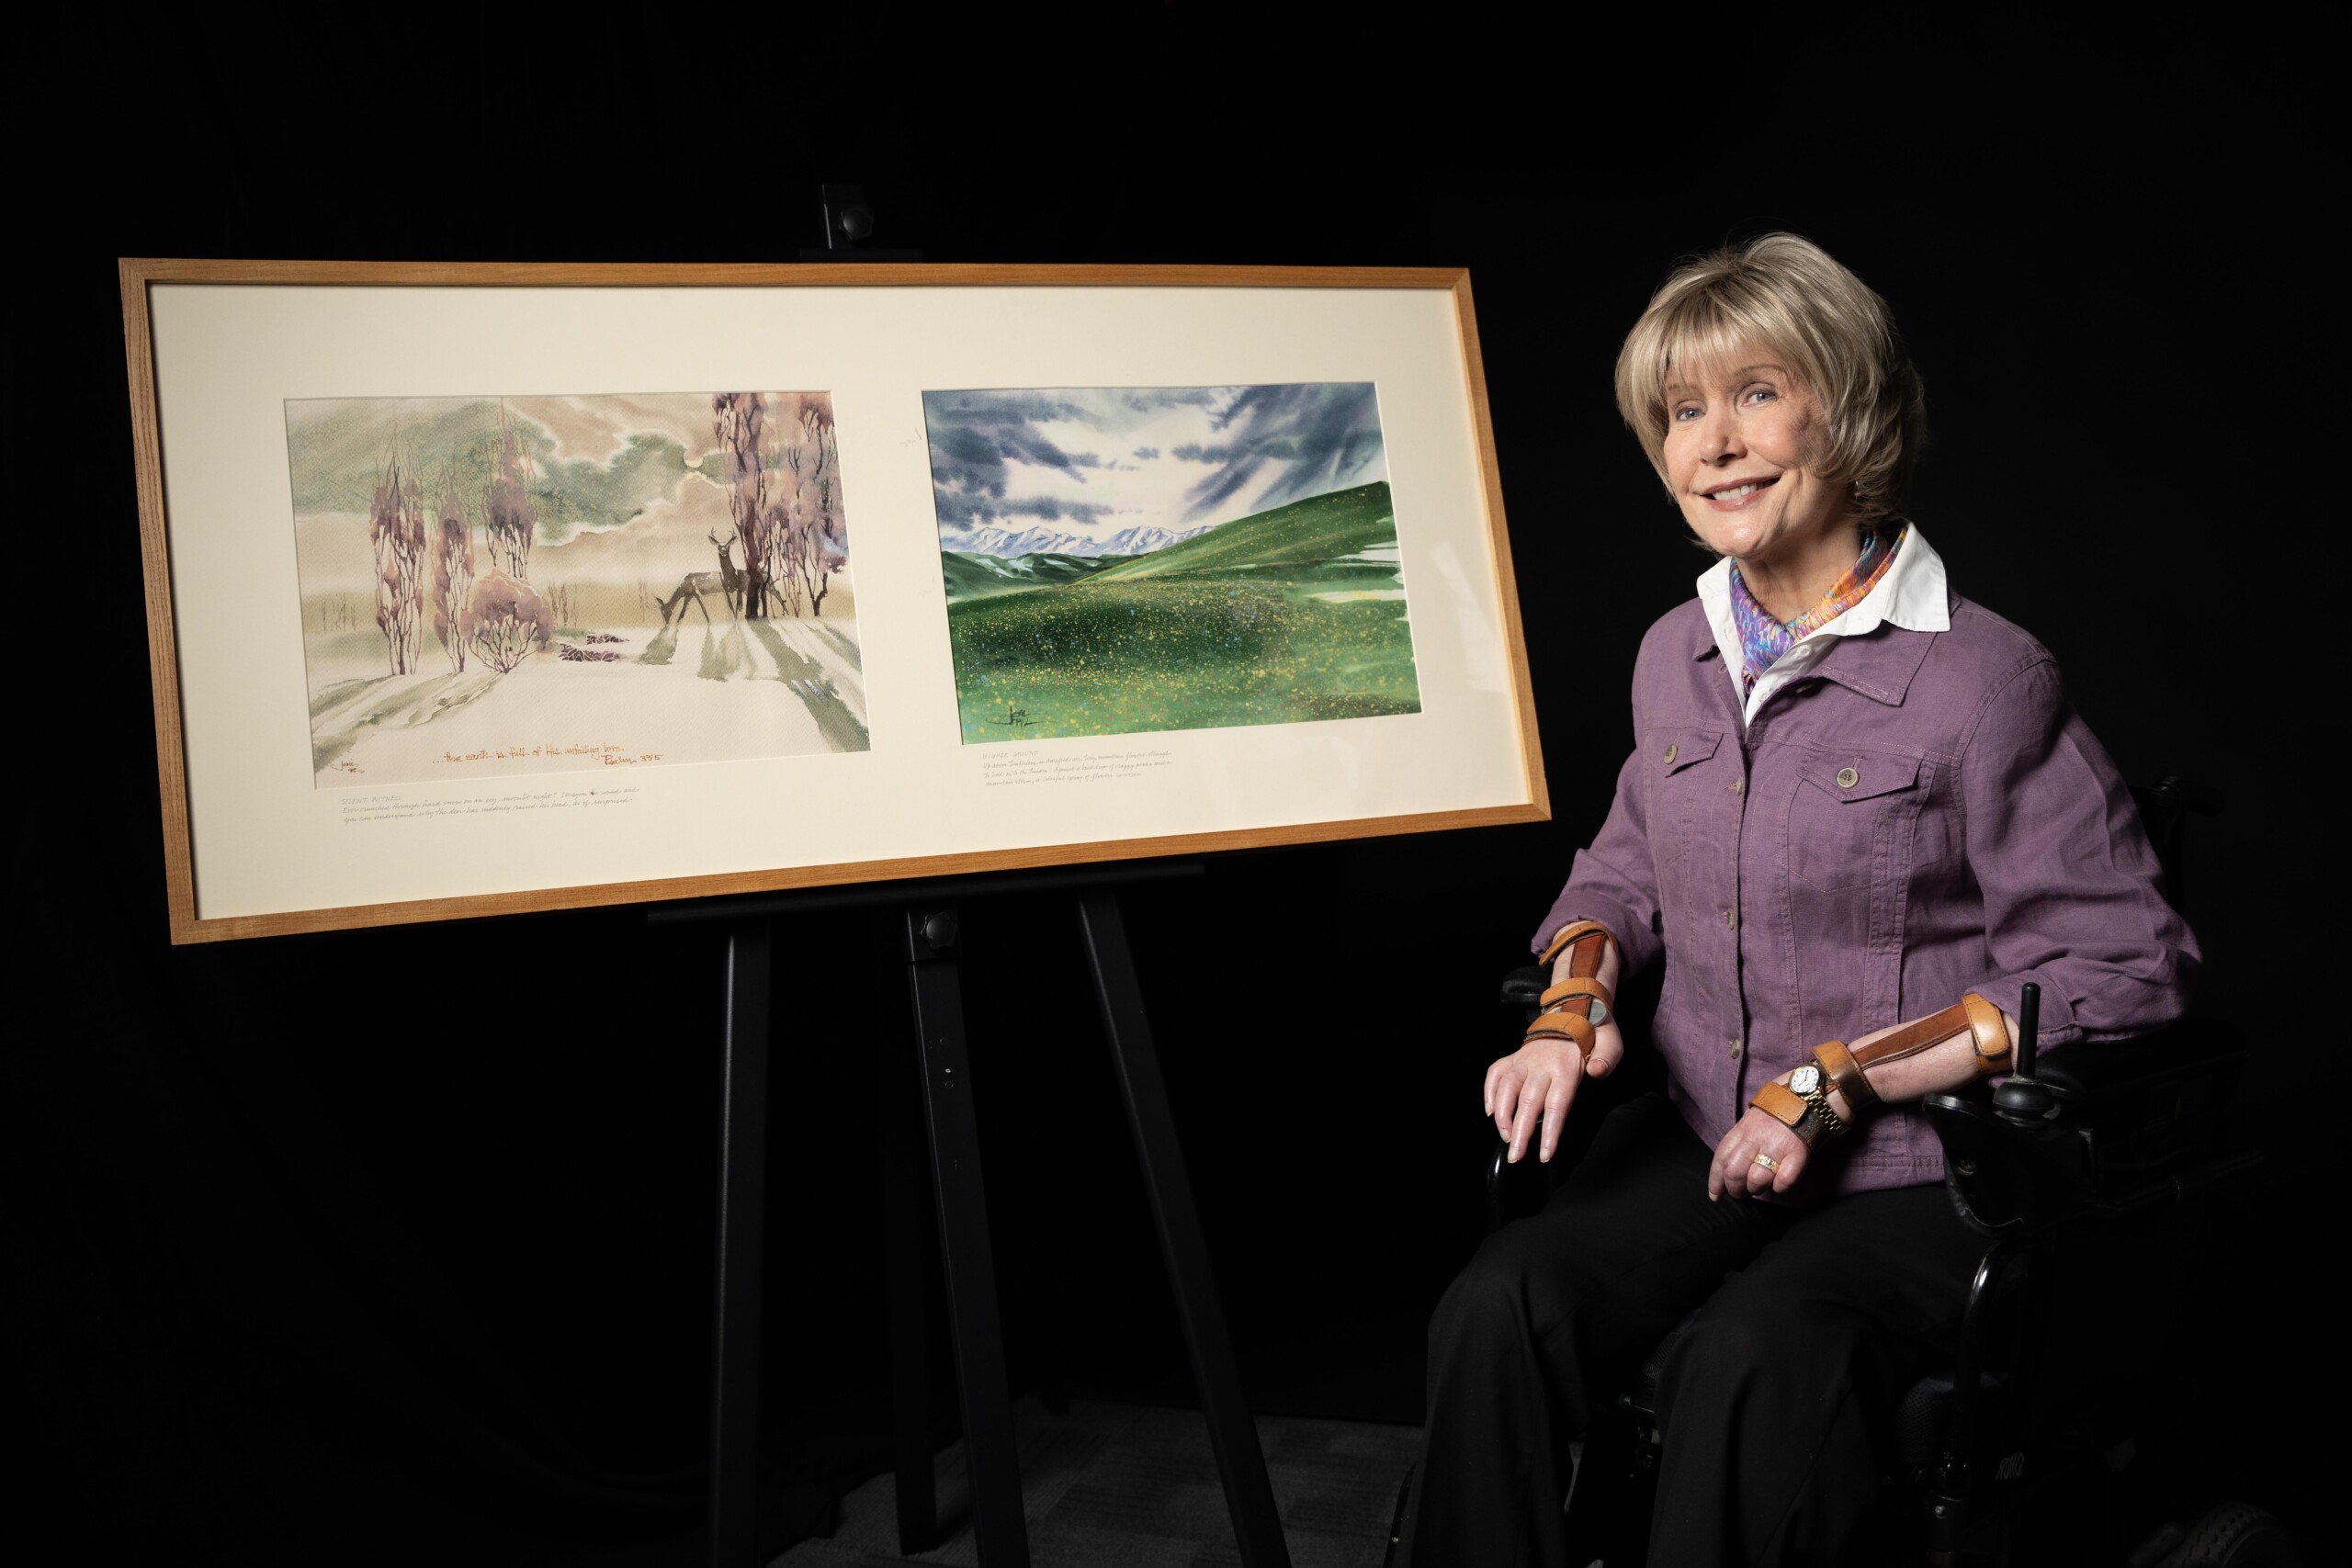 Joni is smiling and sitting in her wheelchair next to her paintings titled "Silent Witness" and "Higher Ground."